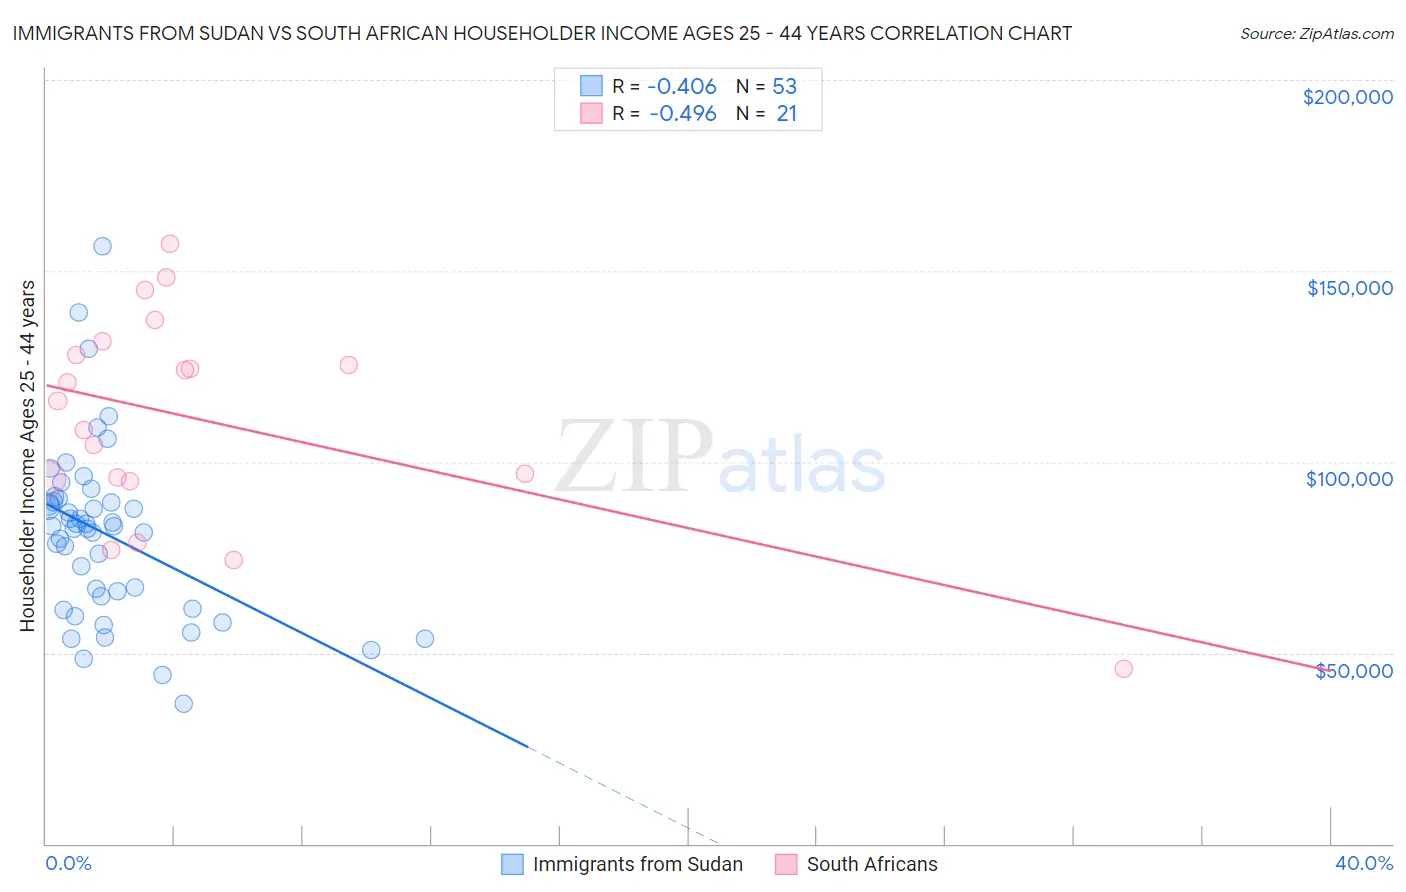 Immigrants from Sudan vs South African Householder Income Ages 25 - 44 years